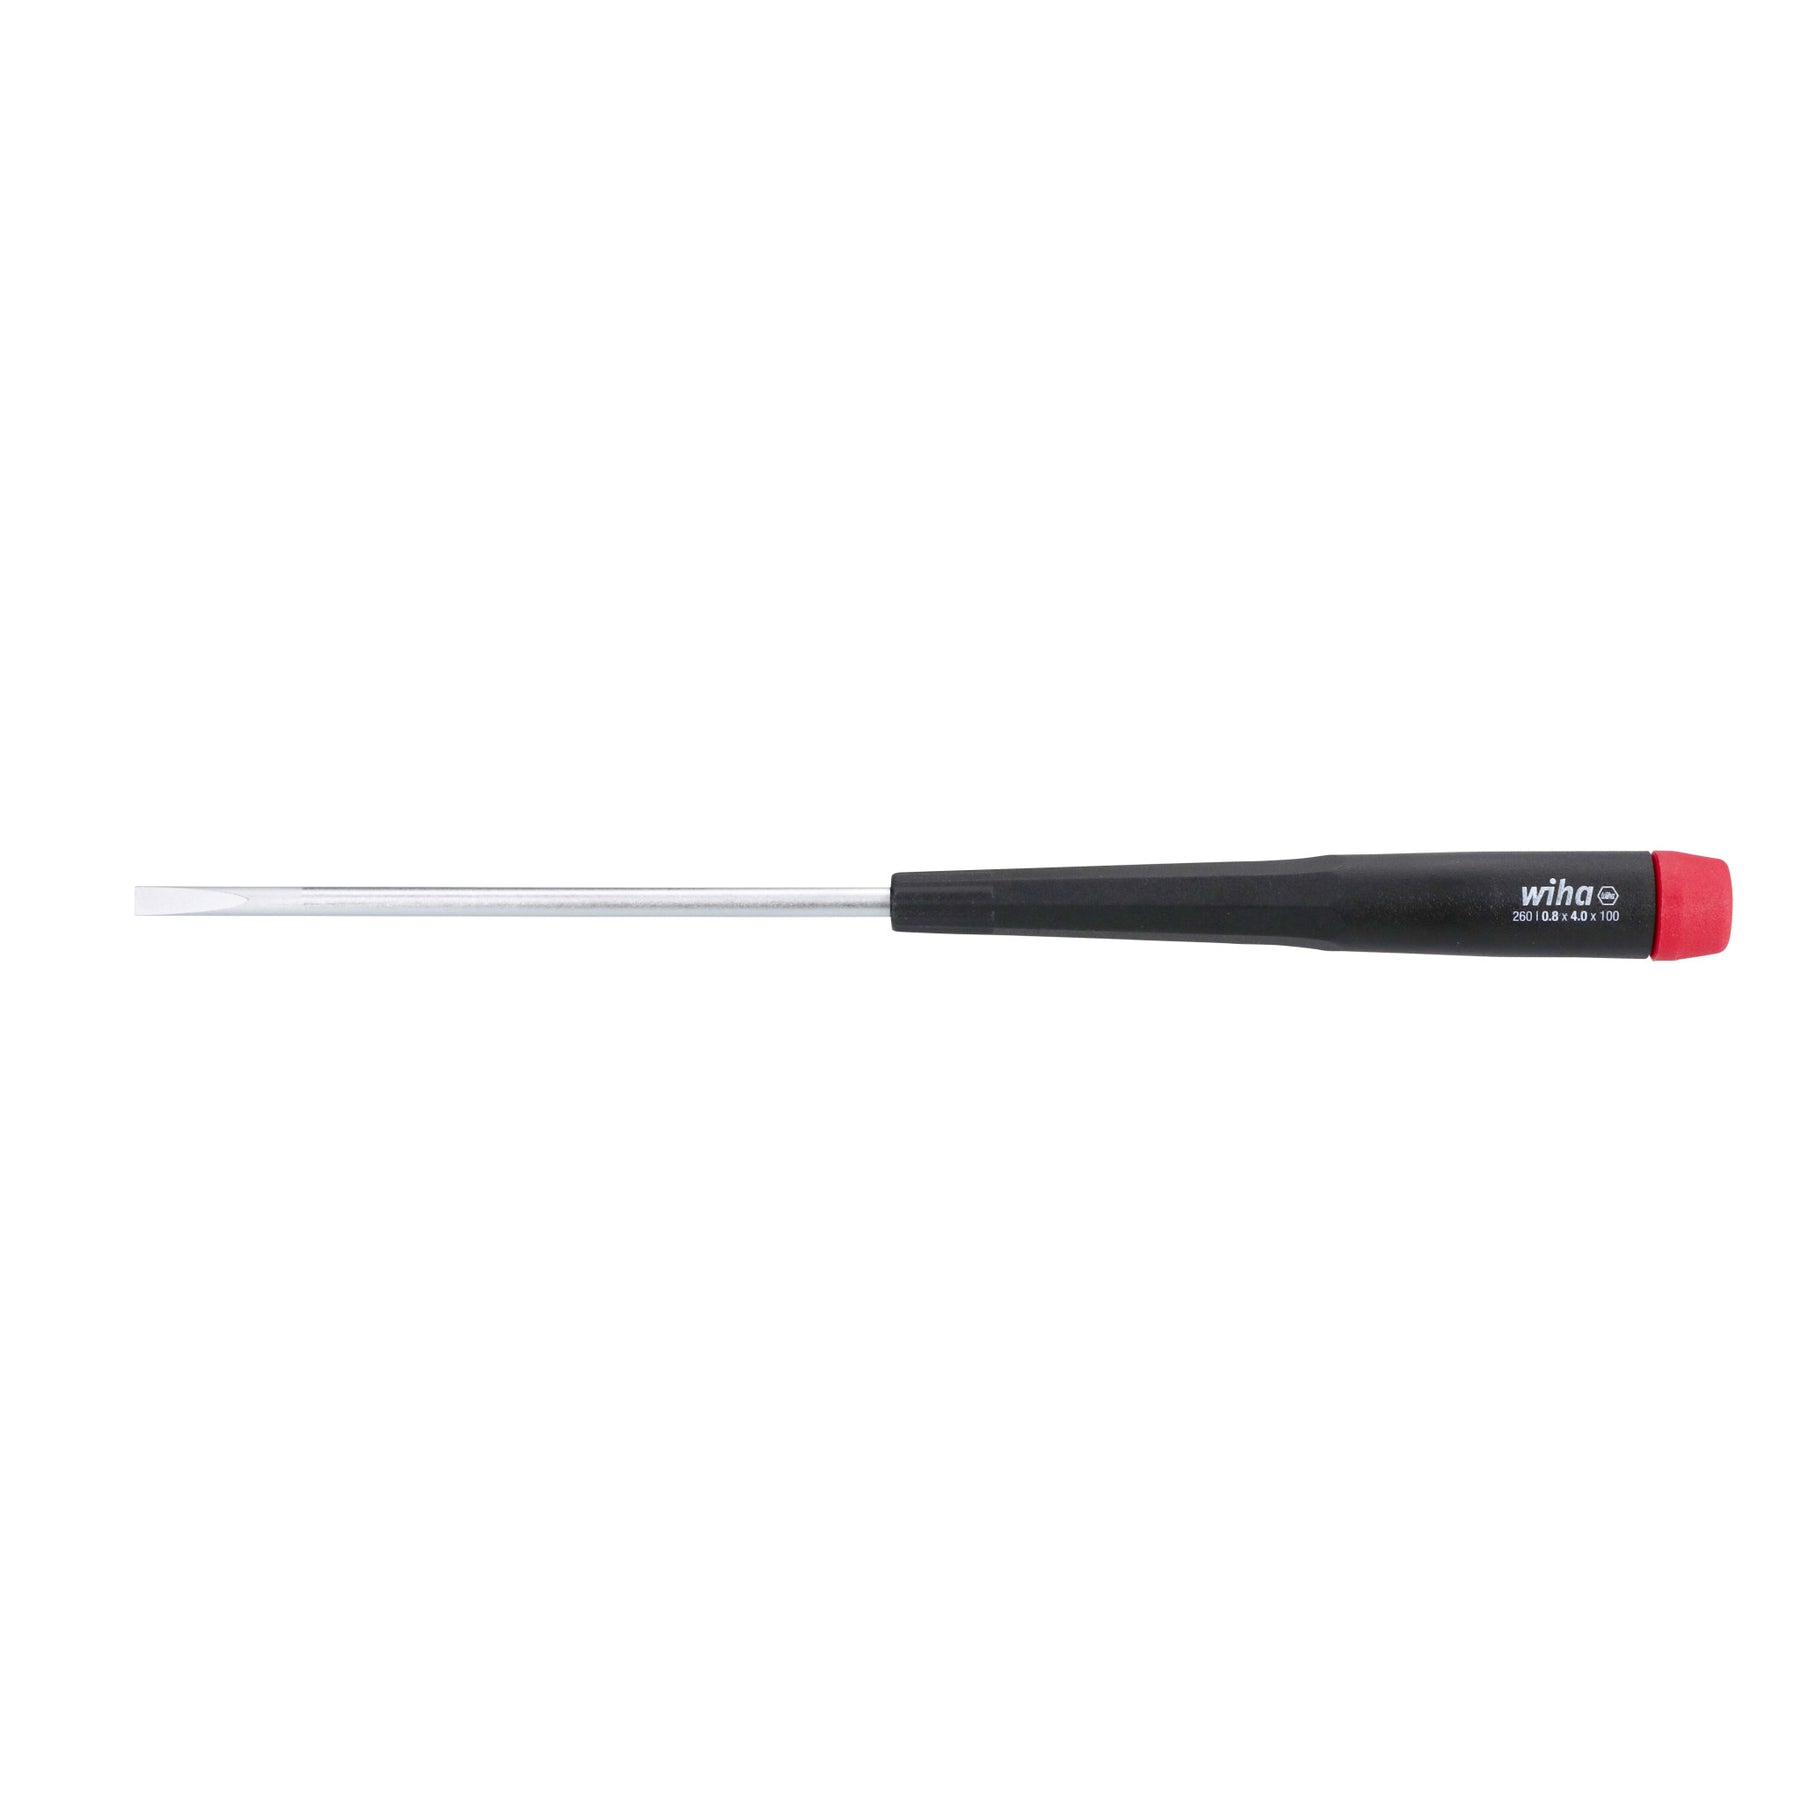 Precision Slotted Screwdriver 4.0mm x 100mm